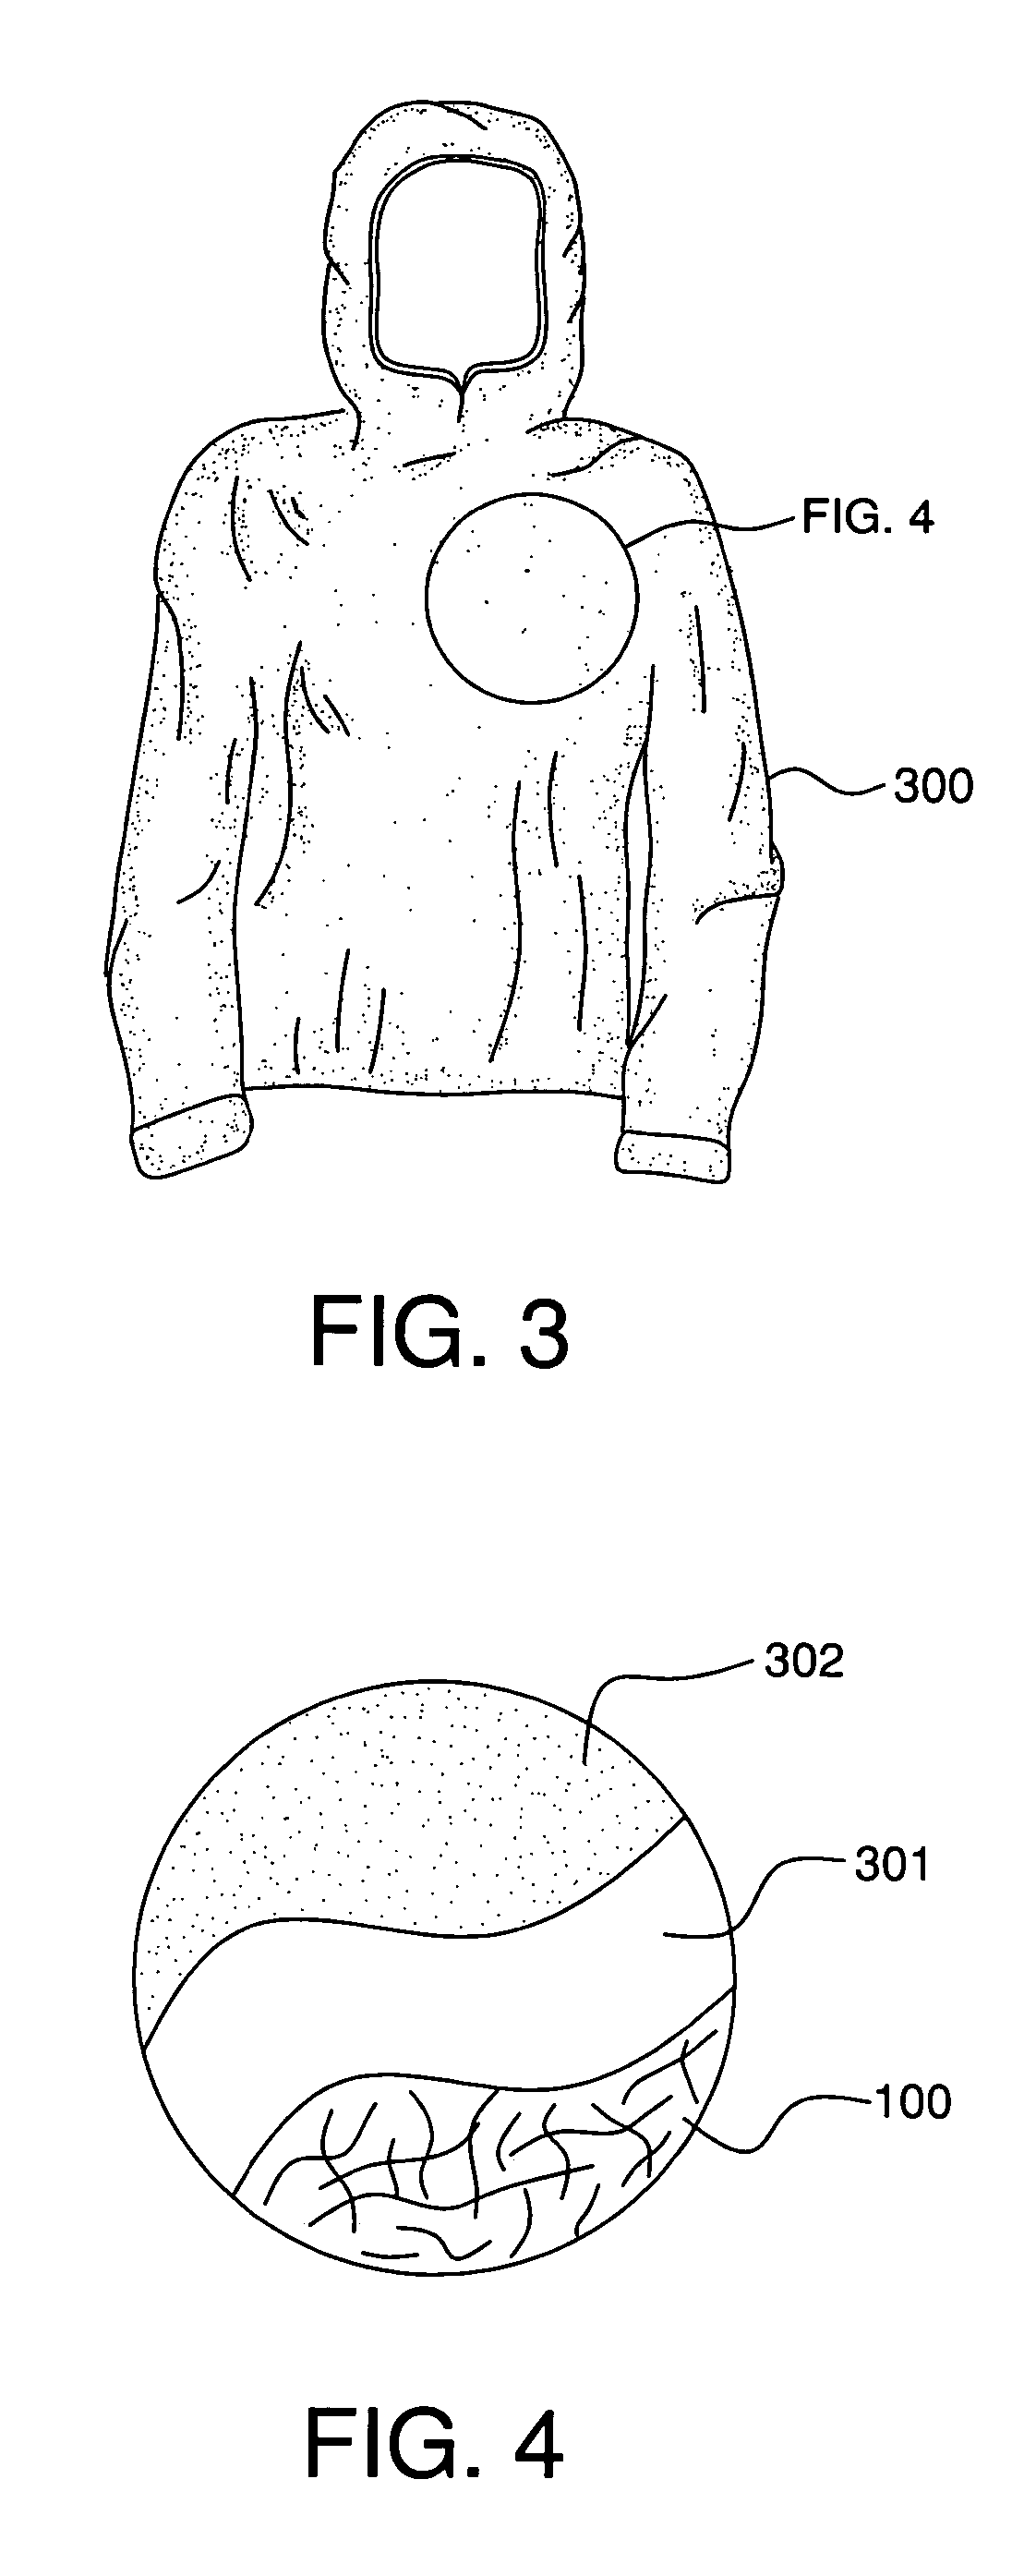 Water vapor breathable, liquid water resistant material